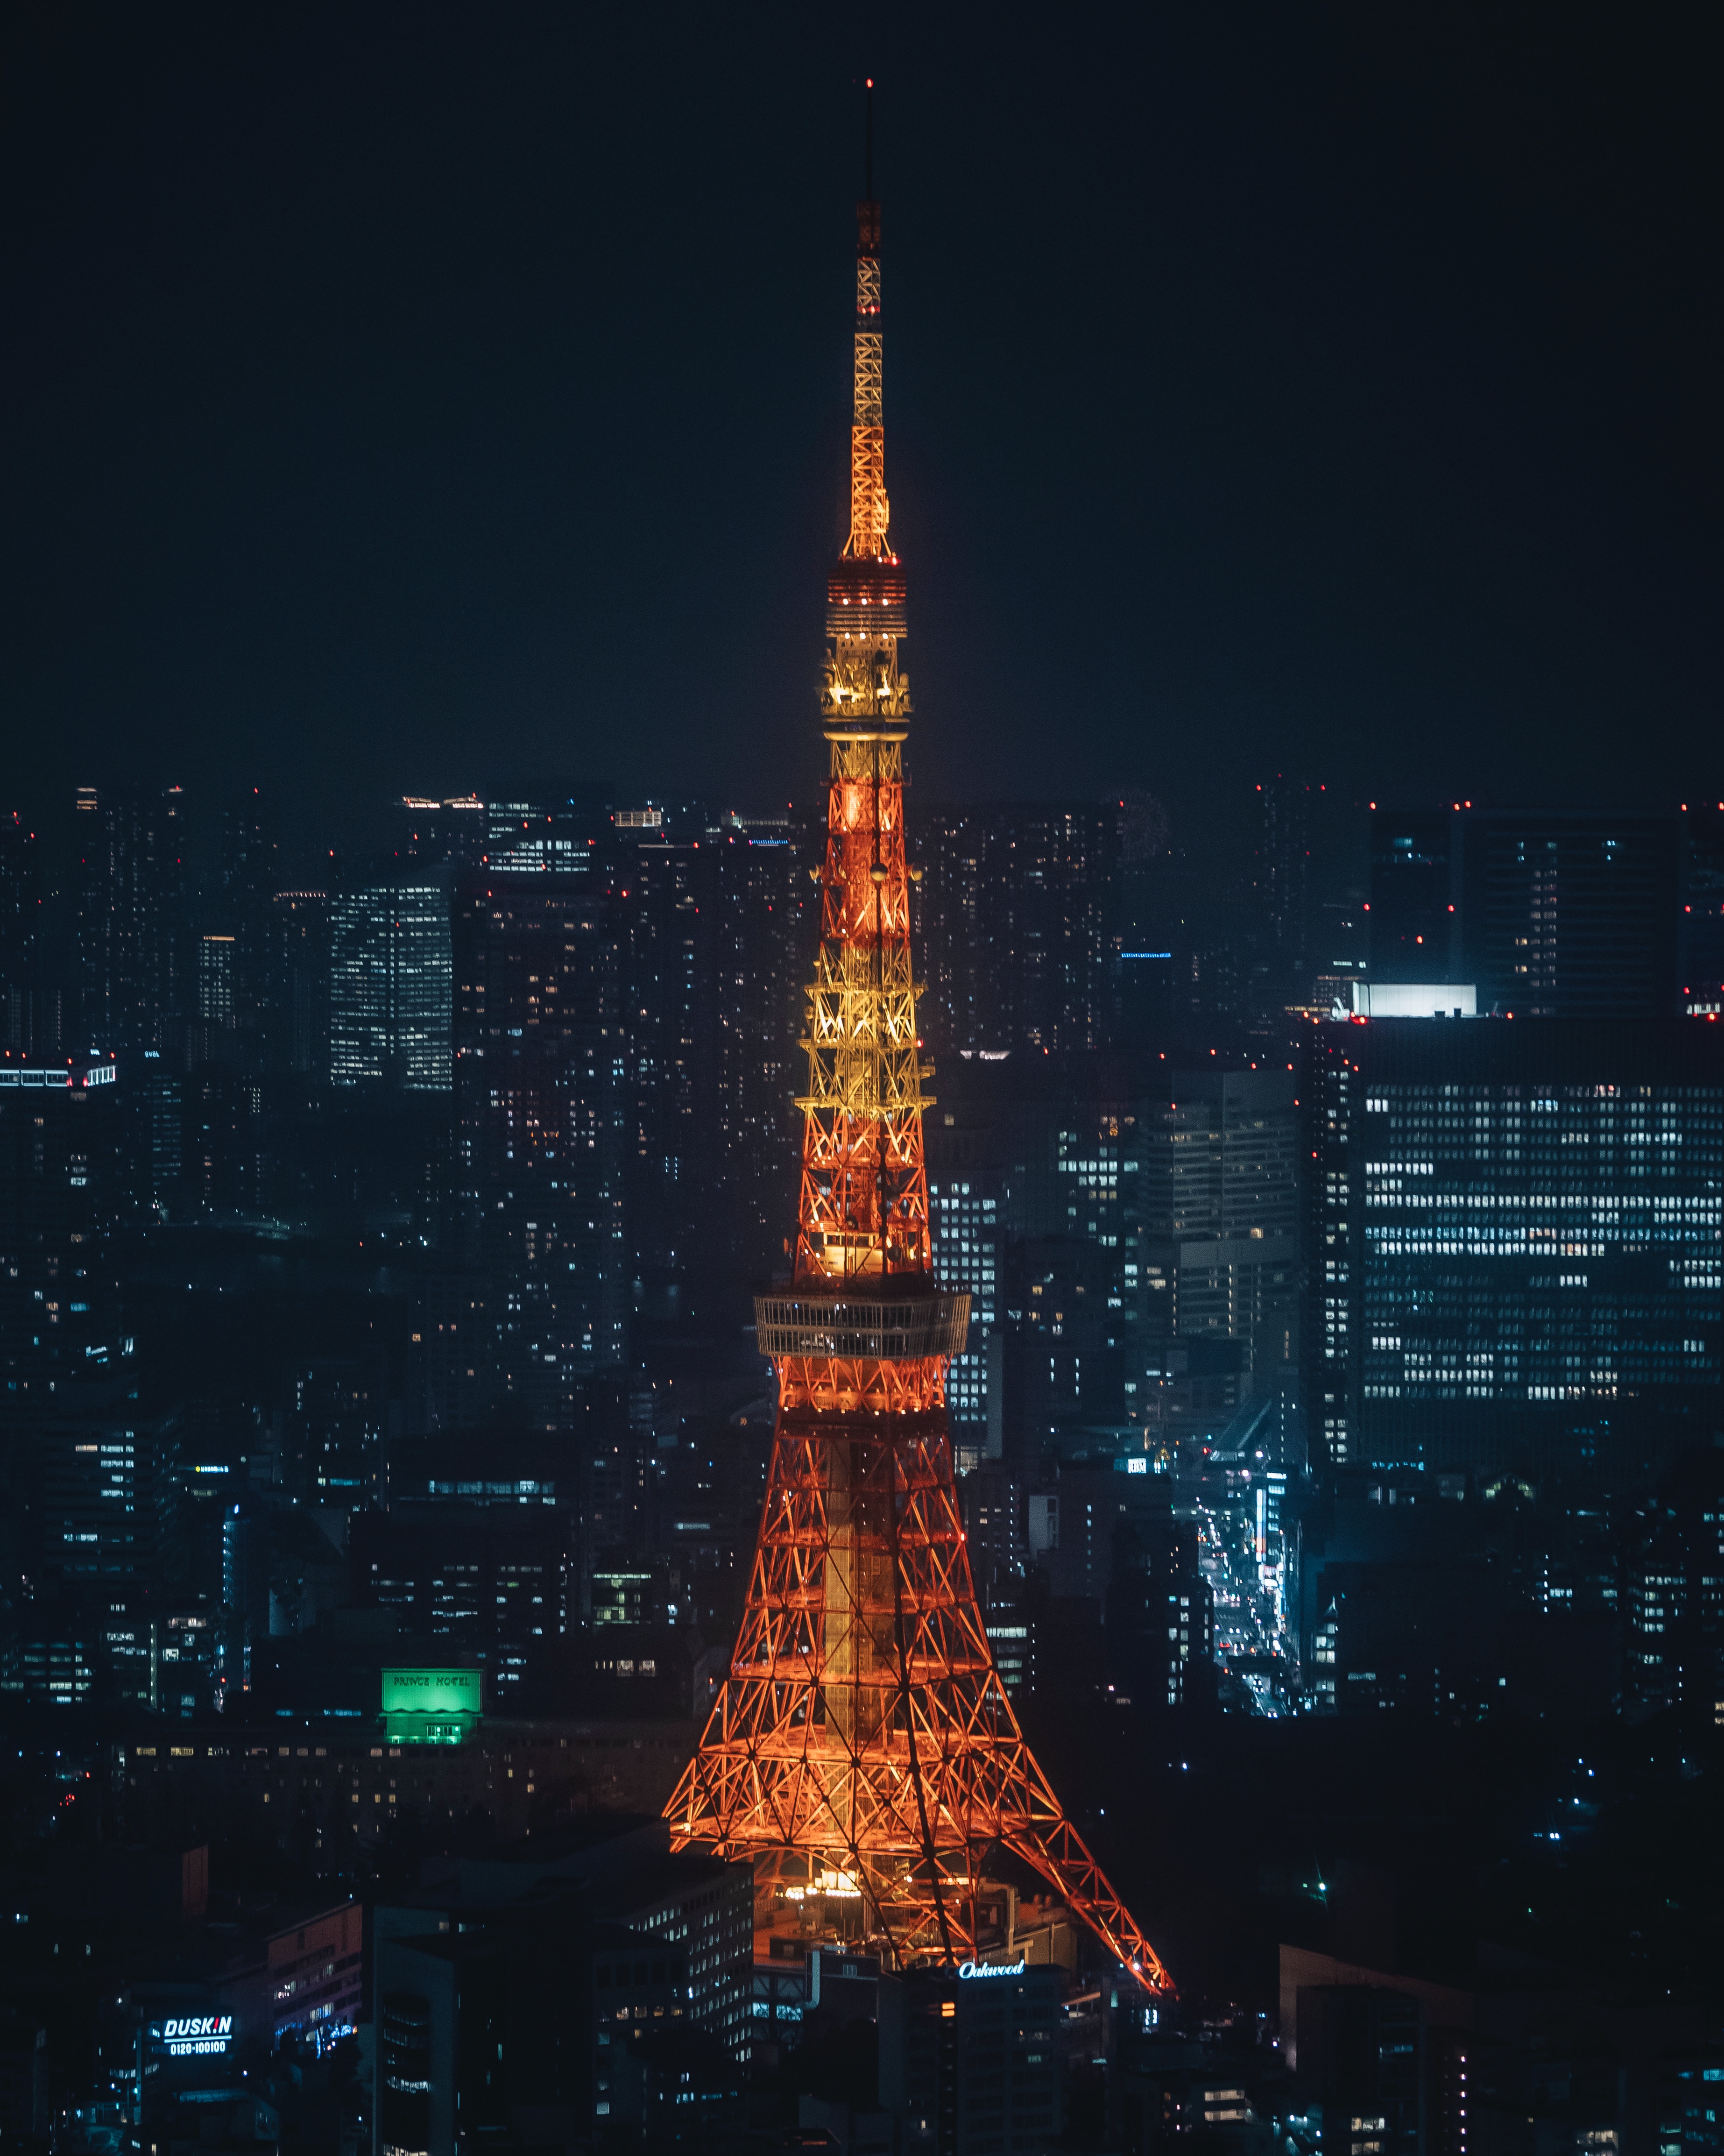 Tokyo Tower lighted in various colours at night, including yellow, orange, and red and light brown. It looks very similar to the Eiffel Tower in Paris.